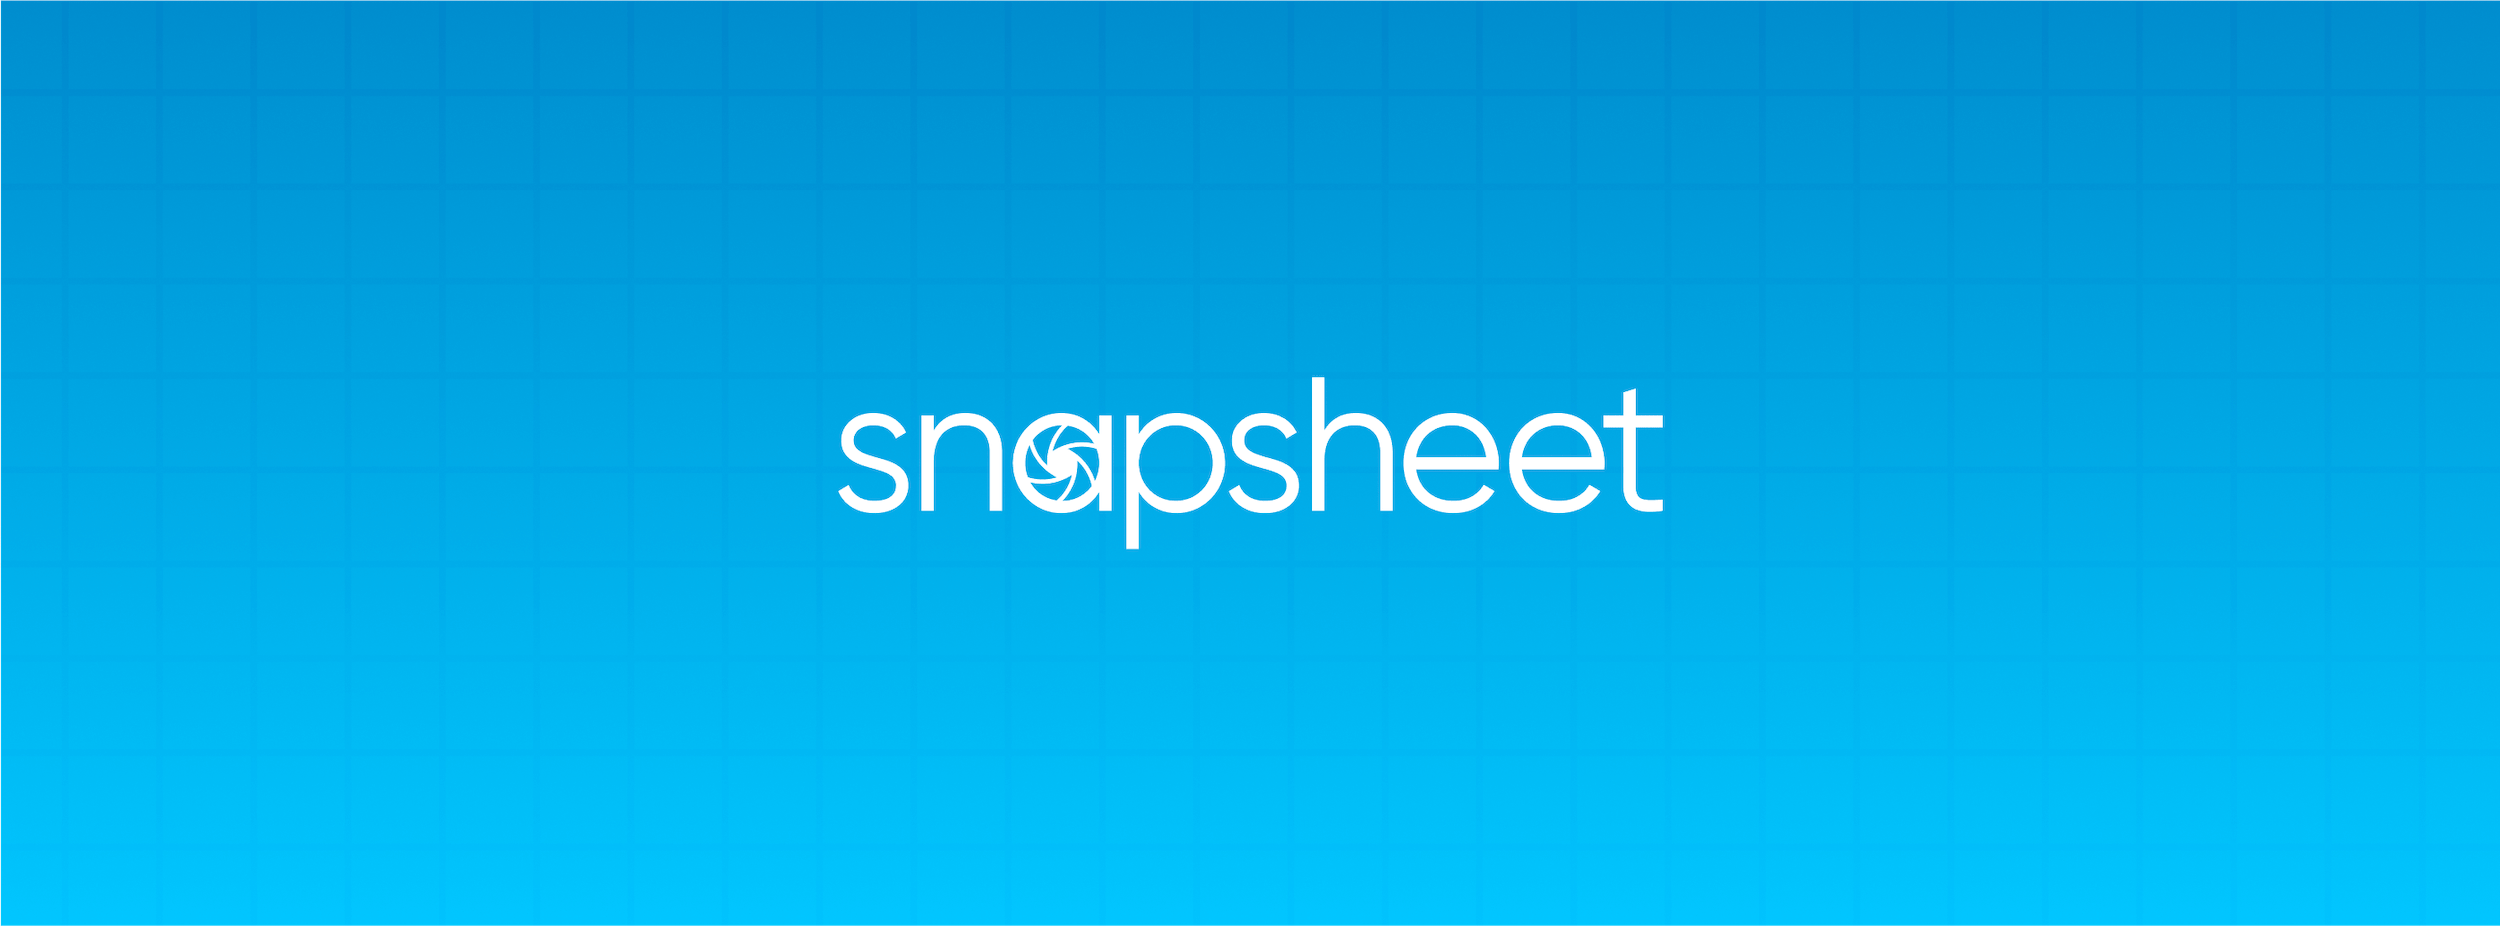 the snapsheet logo in white on a light blue ground with dark blue gridlines